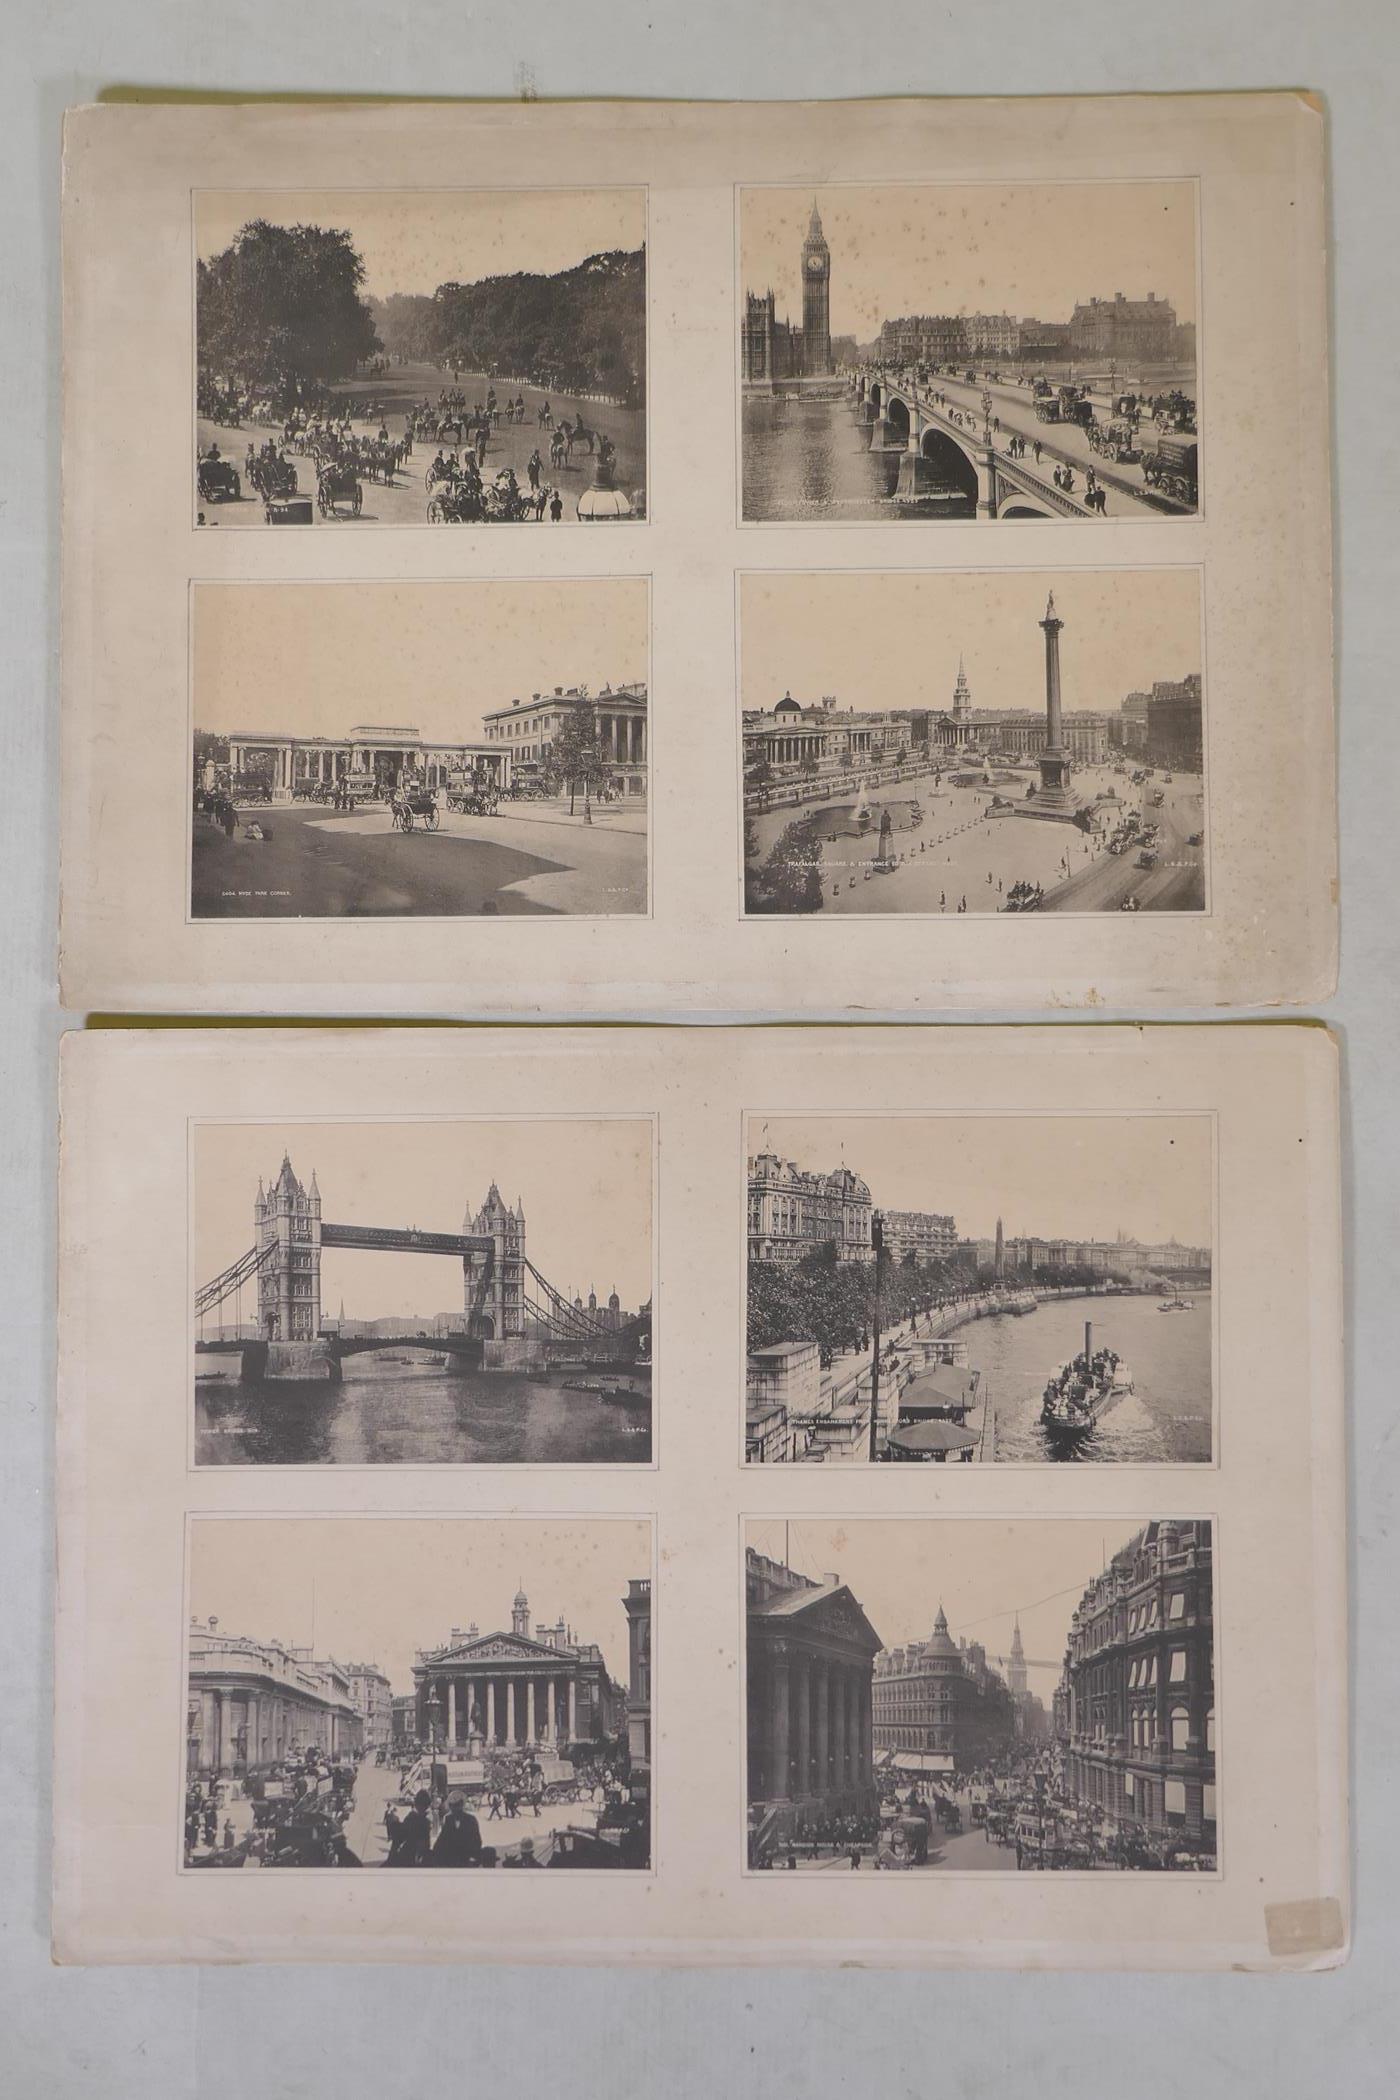 Eight vintage photographs of London by the London Stereoscopic and Photographic Company, including